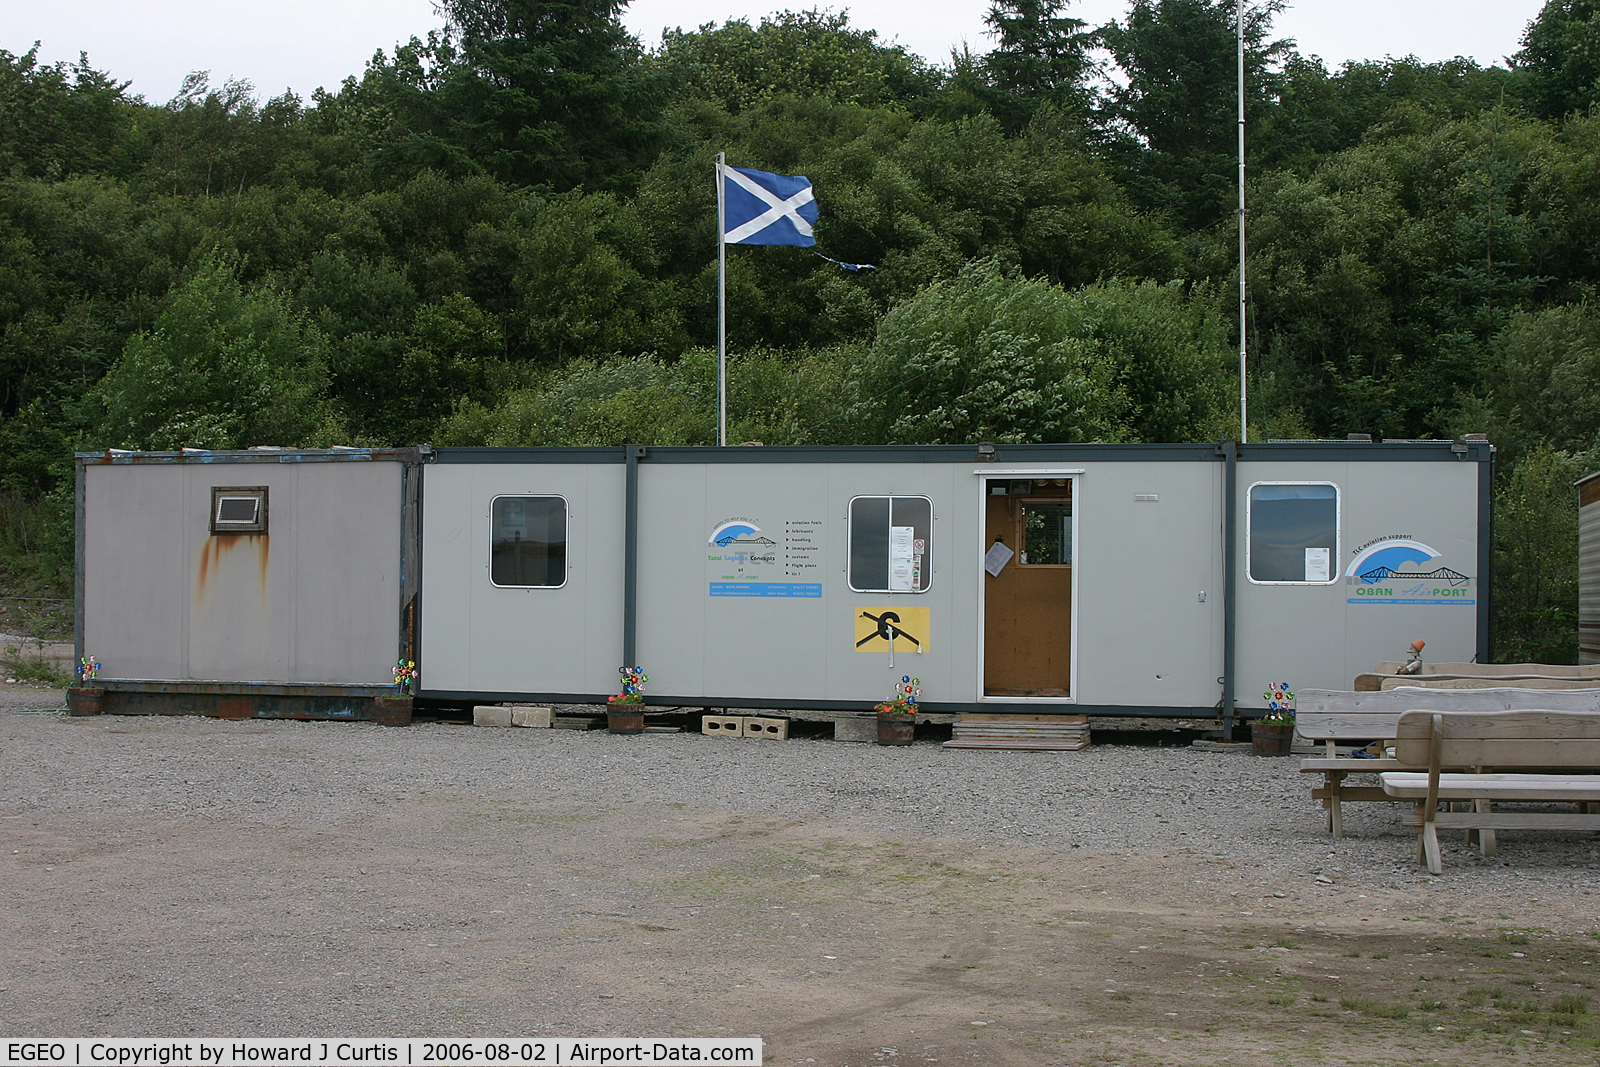 Oban Airport, Oban, Scotland United Kingdom (EGEO) - The old airport administration building/offices.